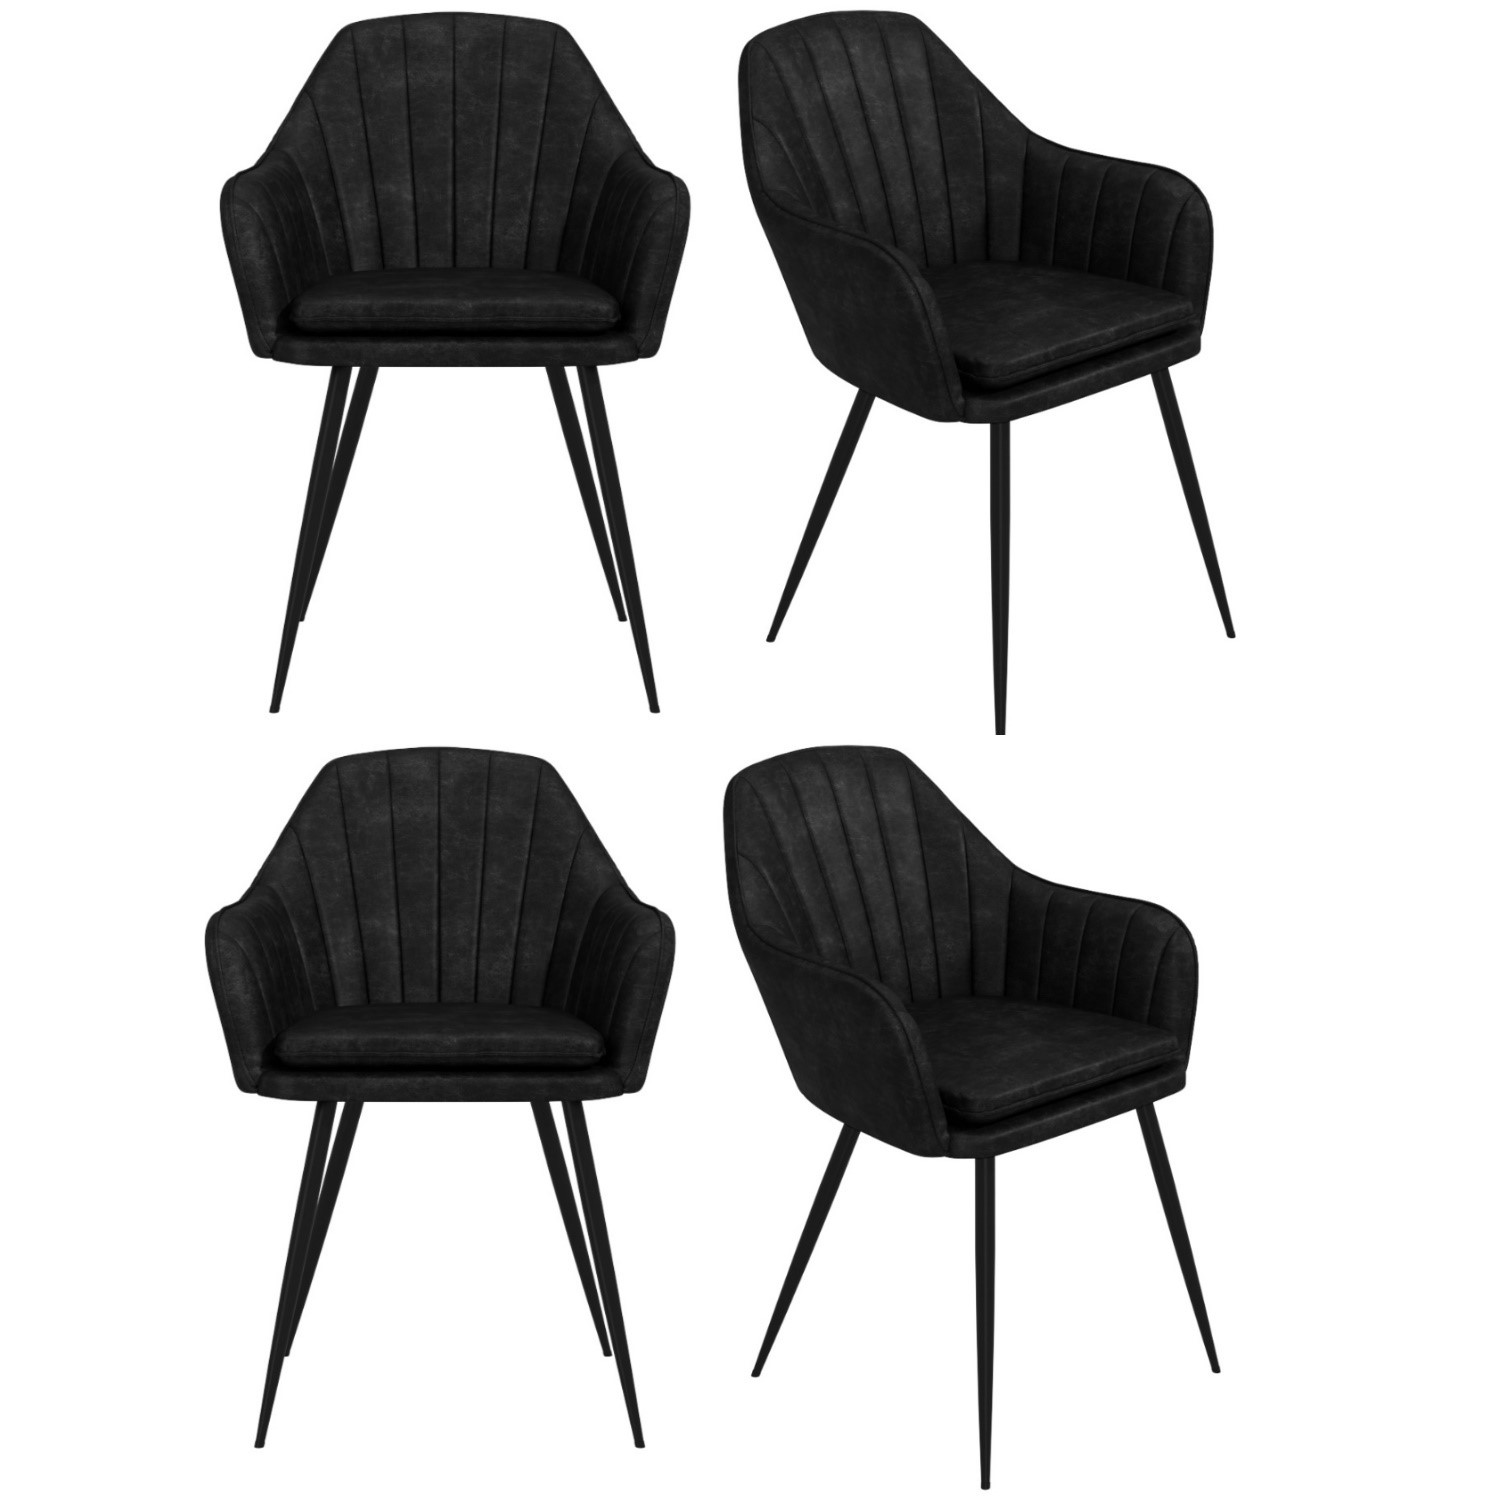 Photo of Set of 4 black faux leather dining chairs - logan